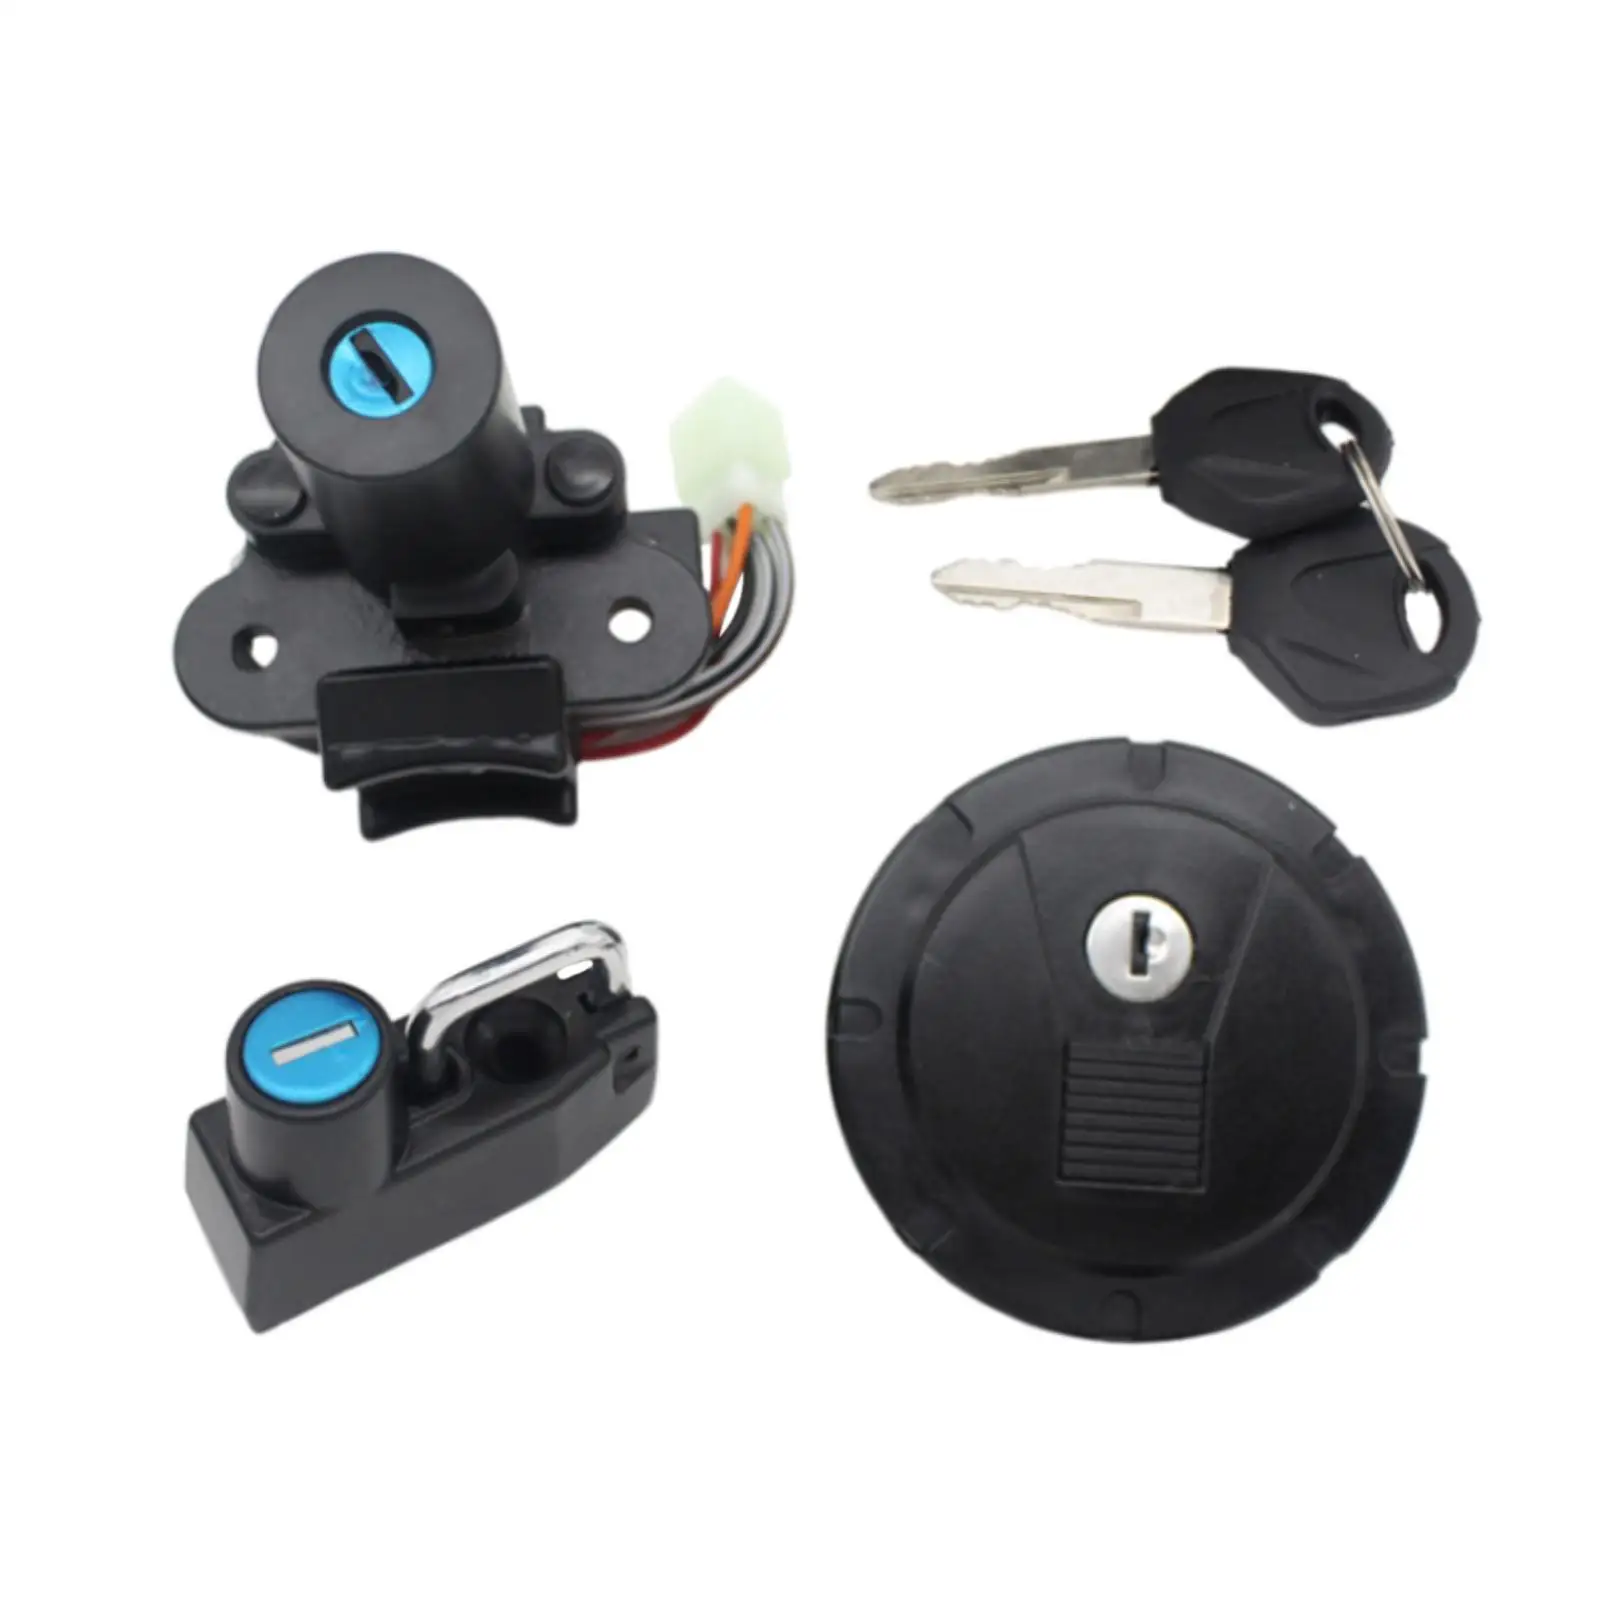 Fuel Gas Tank Cap Lock Cover with Keys Sturdy Accessories for Kawasaki Klx250 Klx250SF Easily Install Motorbike Spare Parts